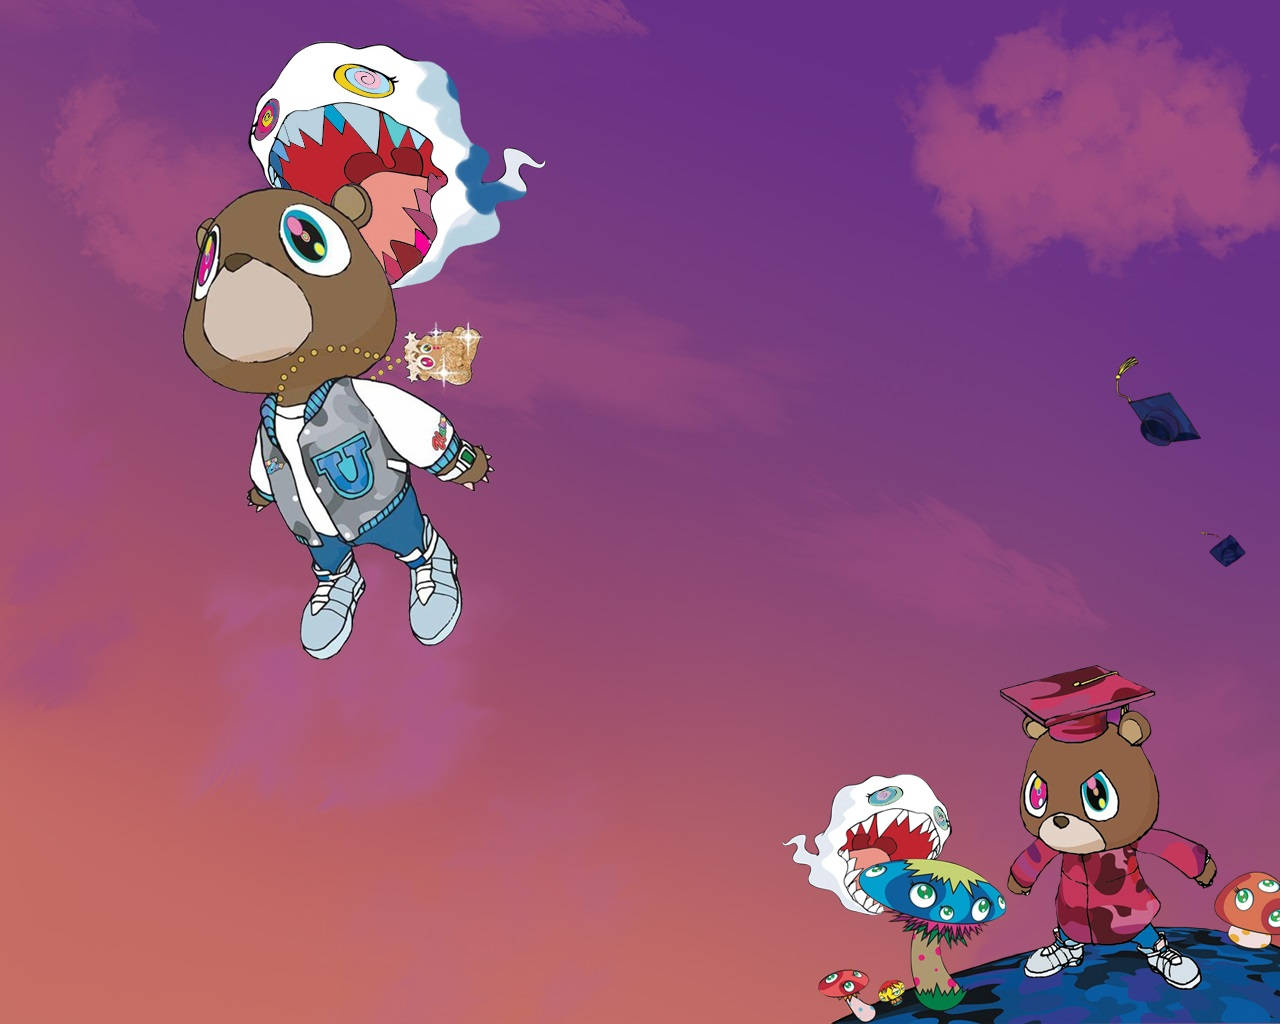 Kanye West Bear In Space With Angry Bear Background